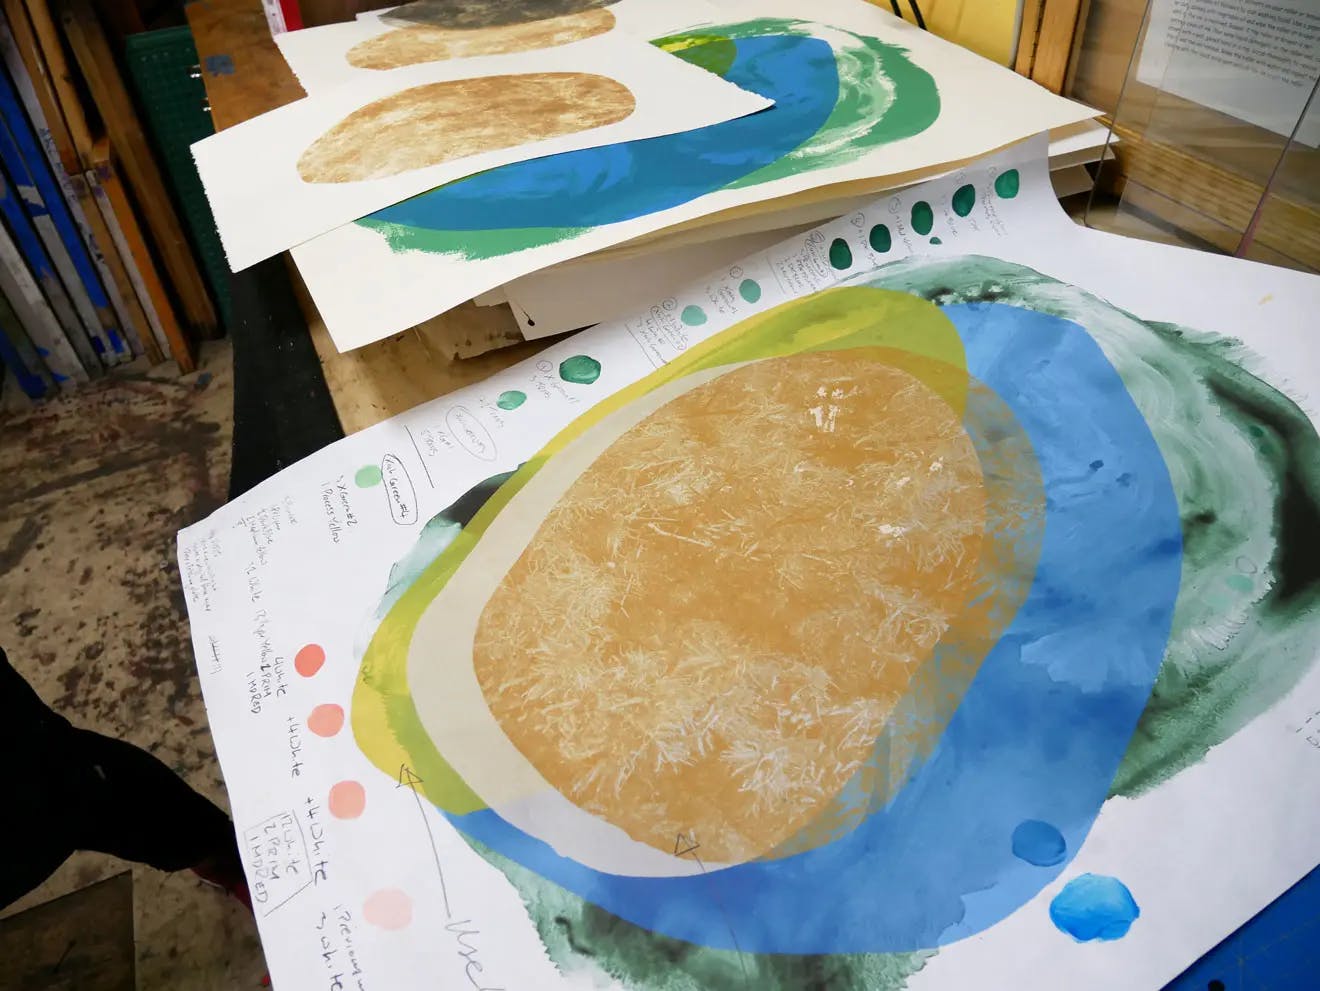 Layered watercolor works in progress by artist Xochi Solis.